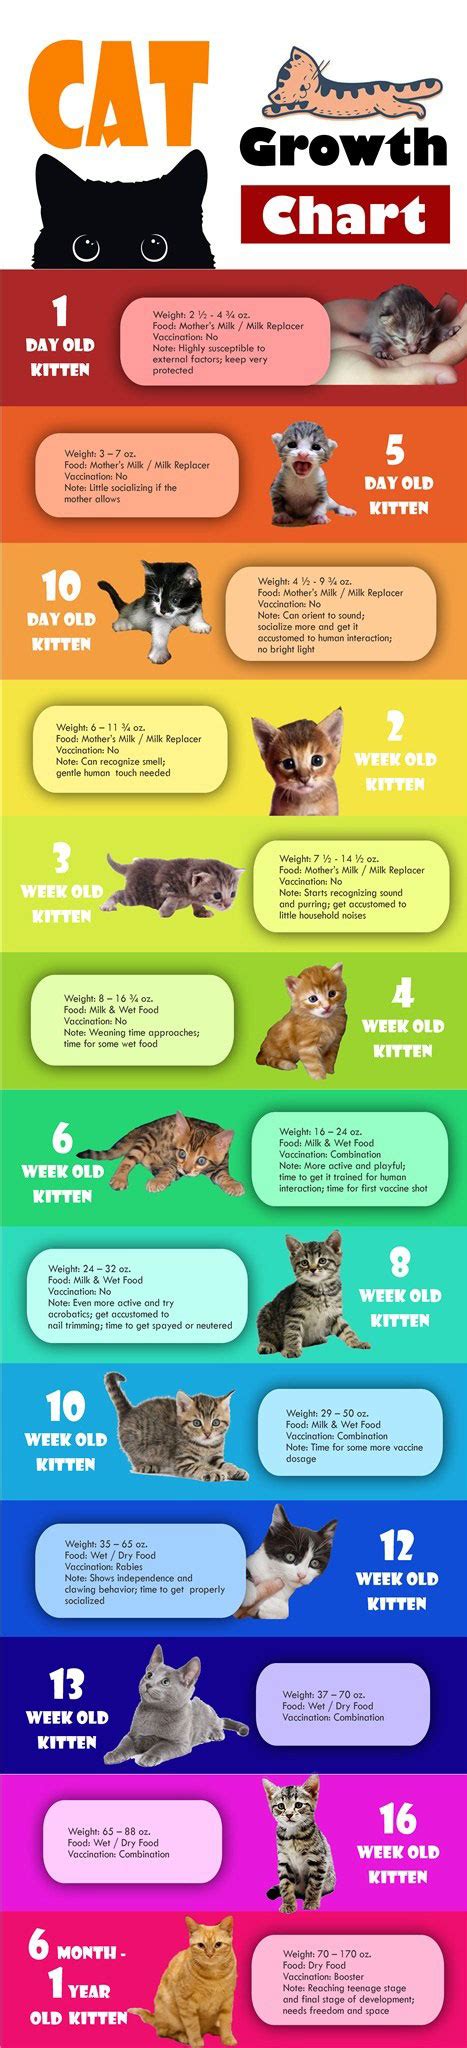 Kittens will require plenty of attention, nutritional support, socialization, and veterinary care. Cat Growth Chart Infographic - Best Infographics